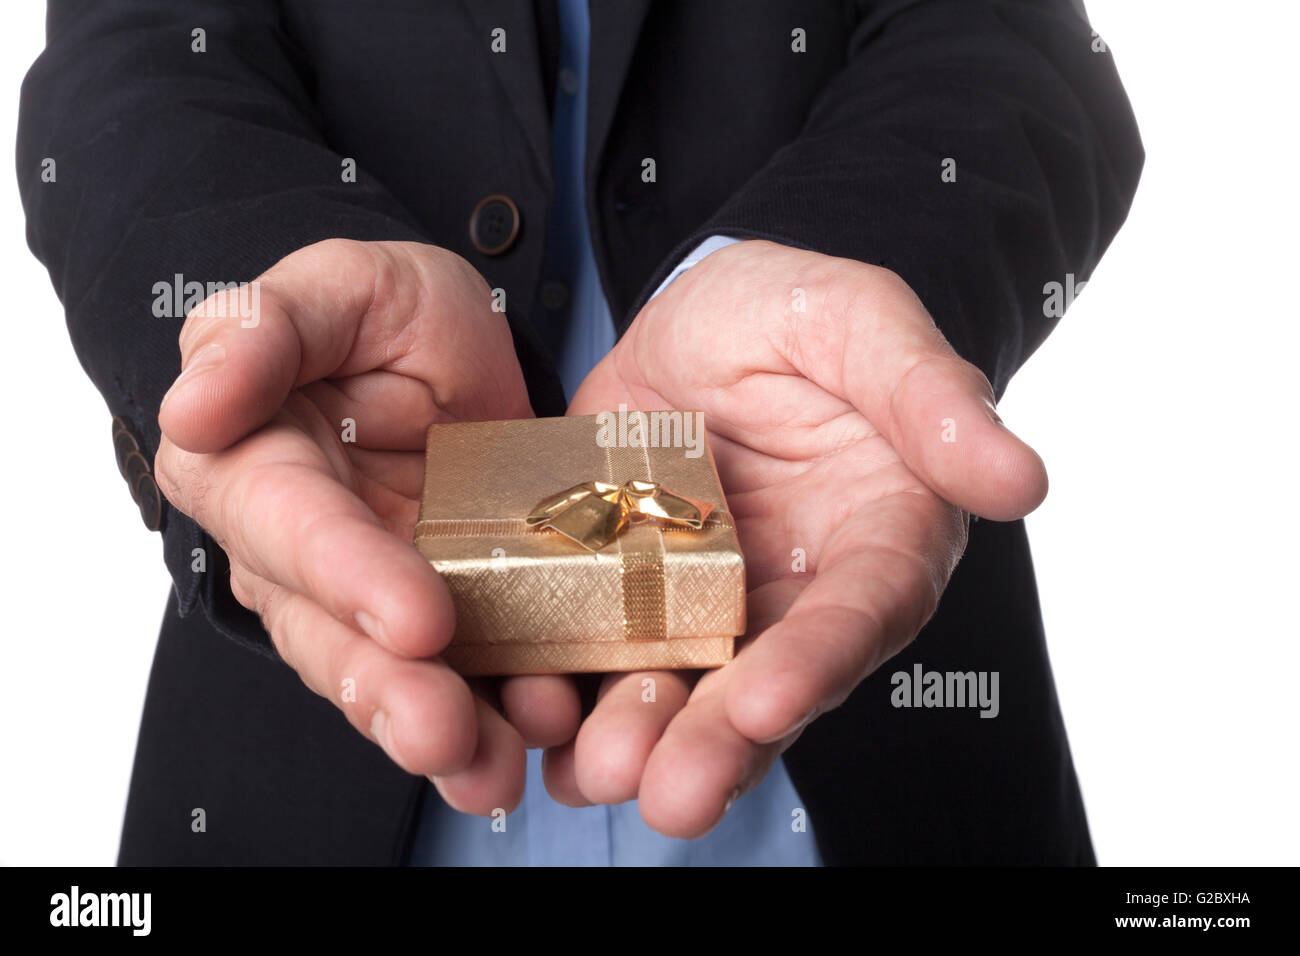 Man Hand in Suit Holding Golden Jewelry Box Isolated on White Background Stock Photo